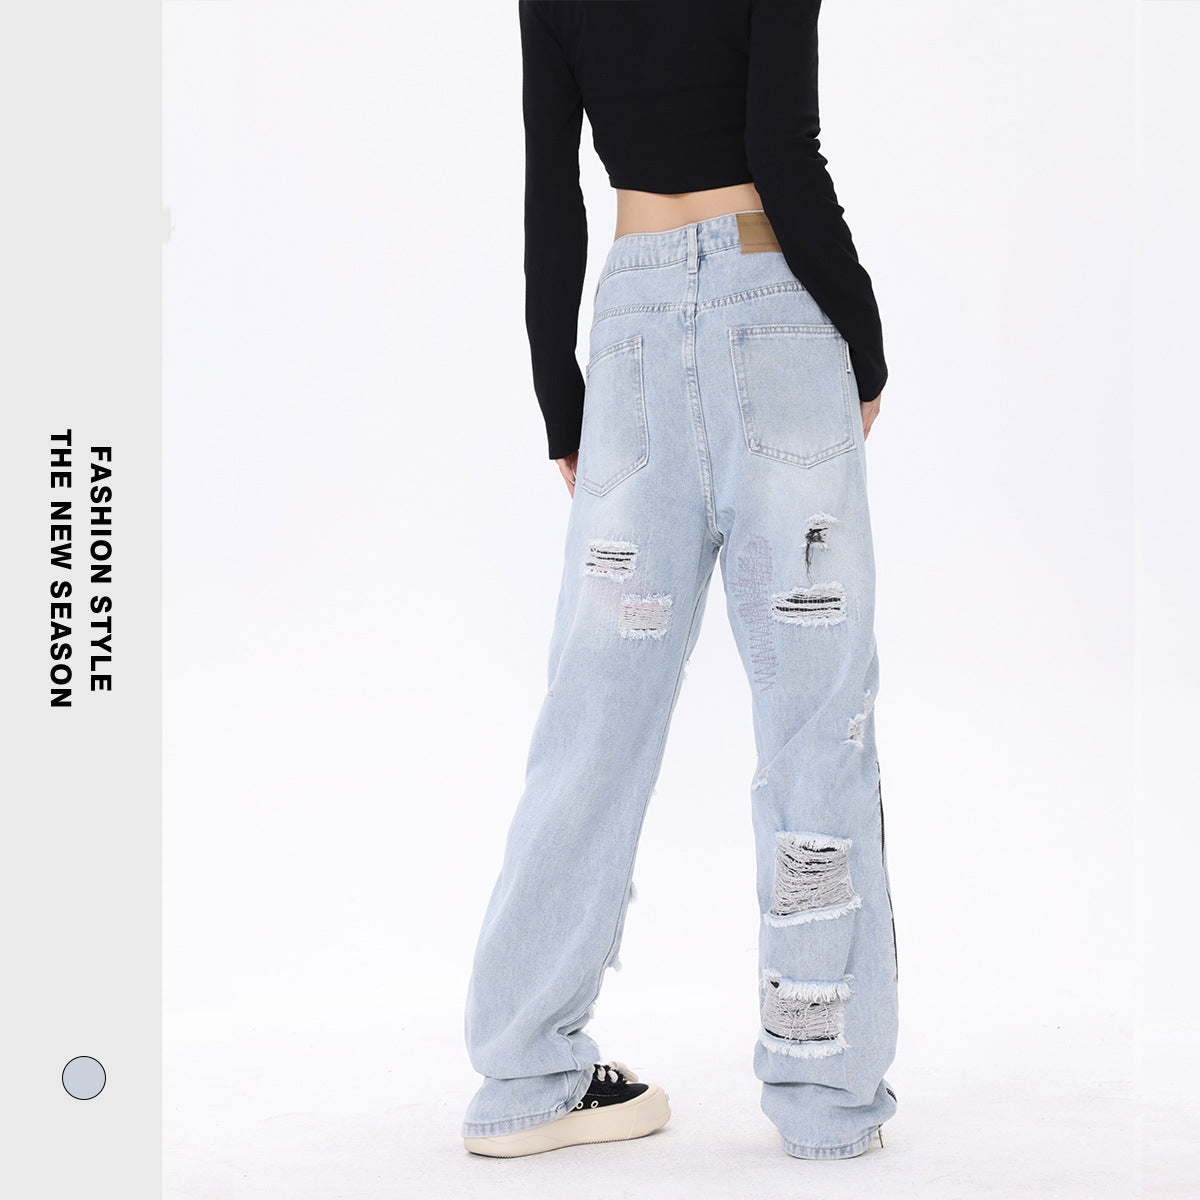 American Street Retro Tattered Jeans Washed Jeans